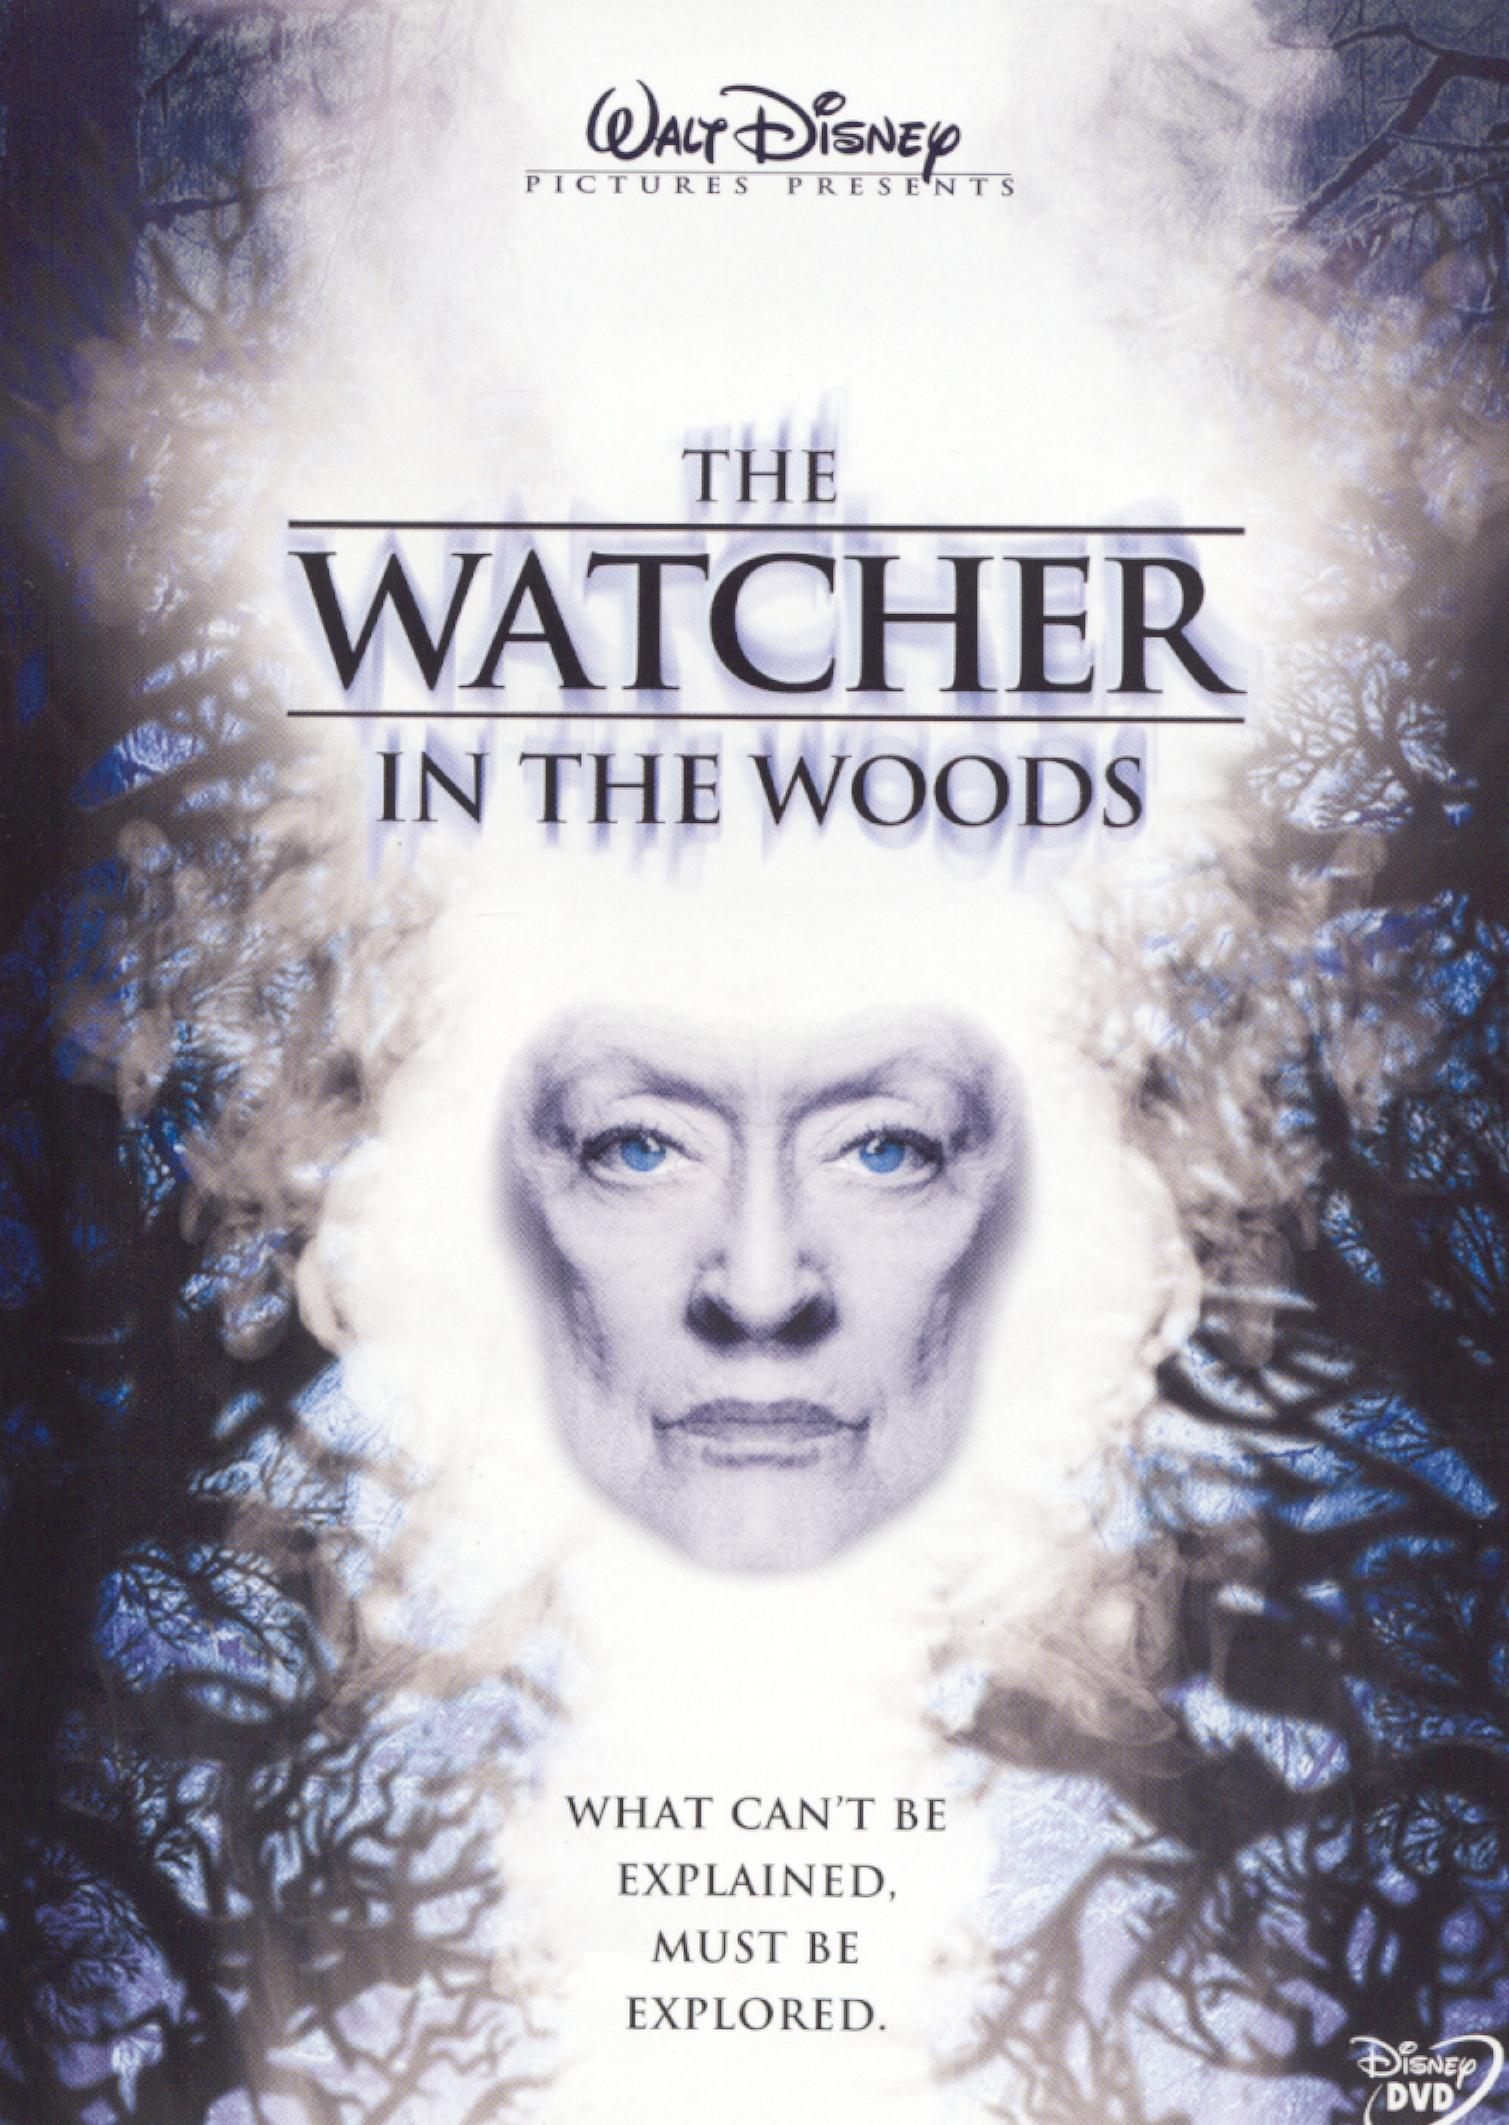 Daily Grindhouse  40 Years Of THE WATCHER IN THE WOODS, Disney's